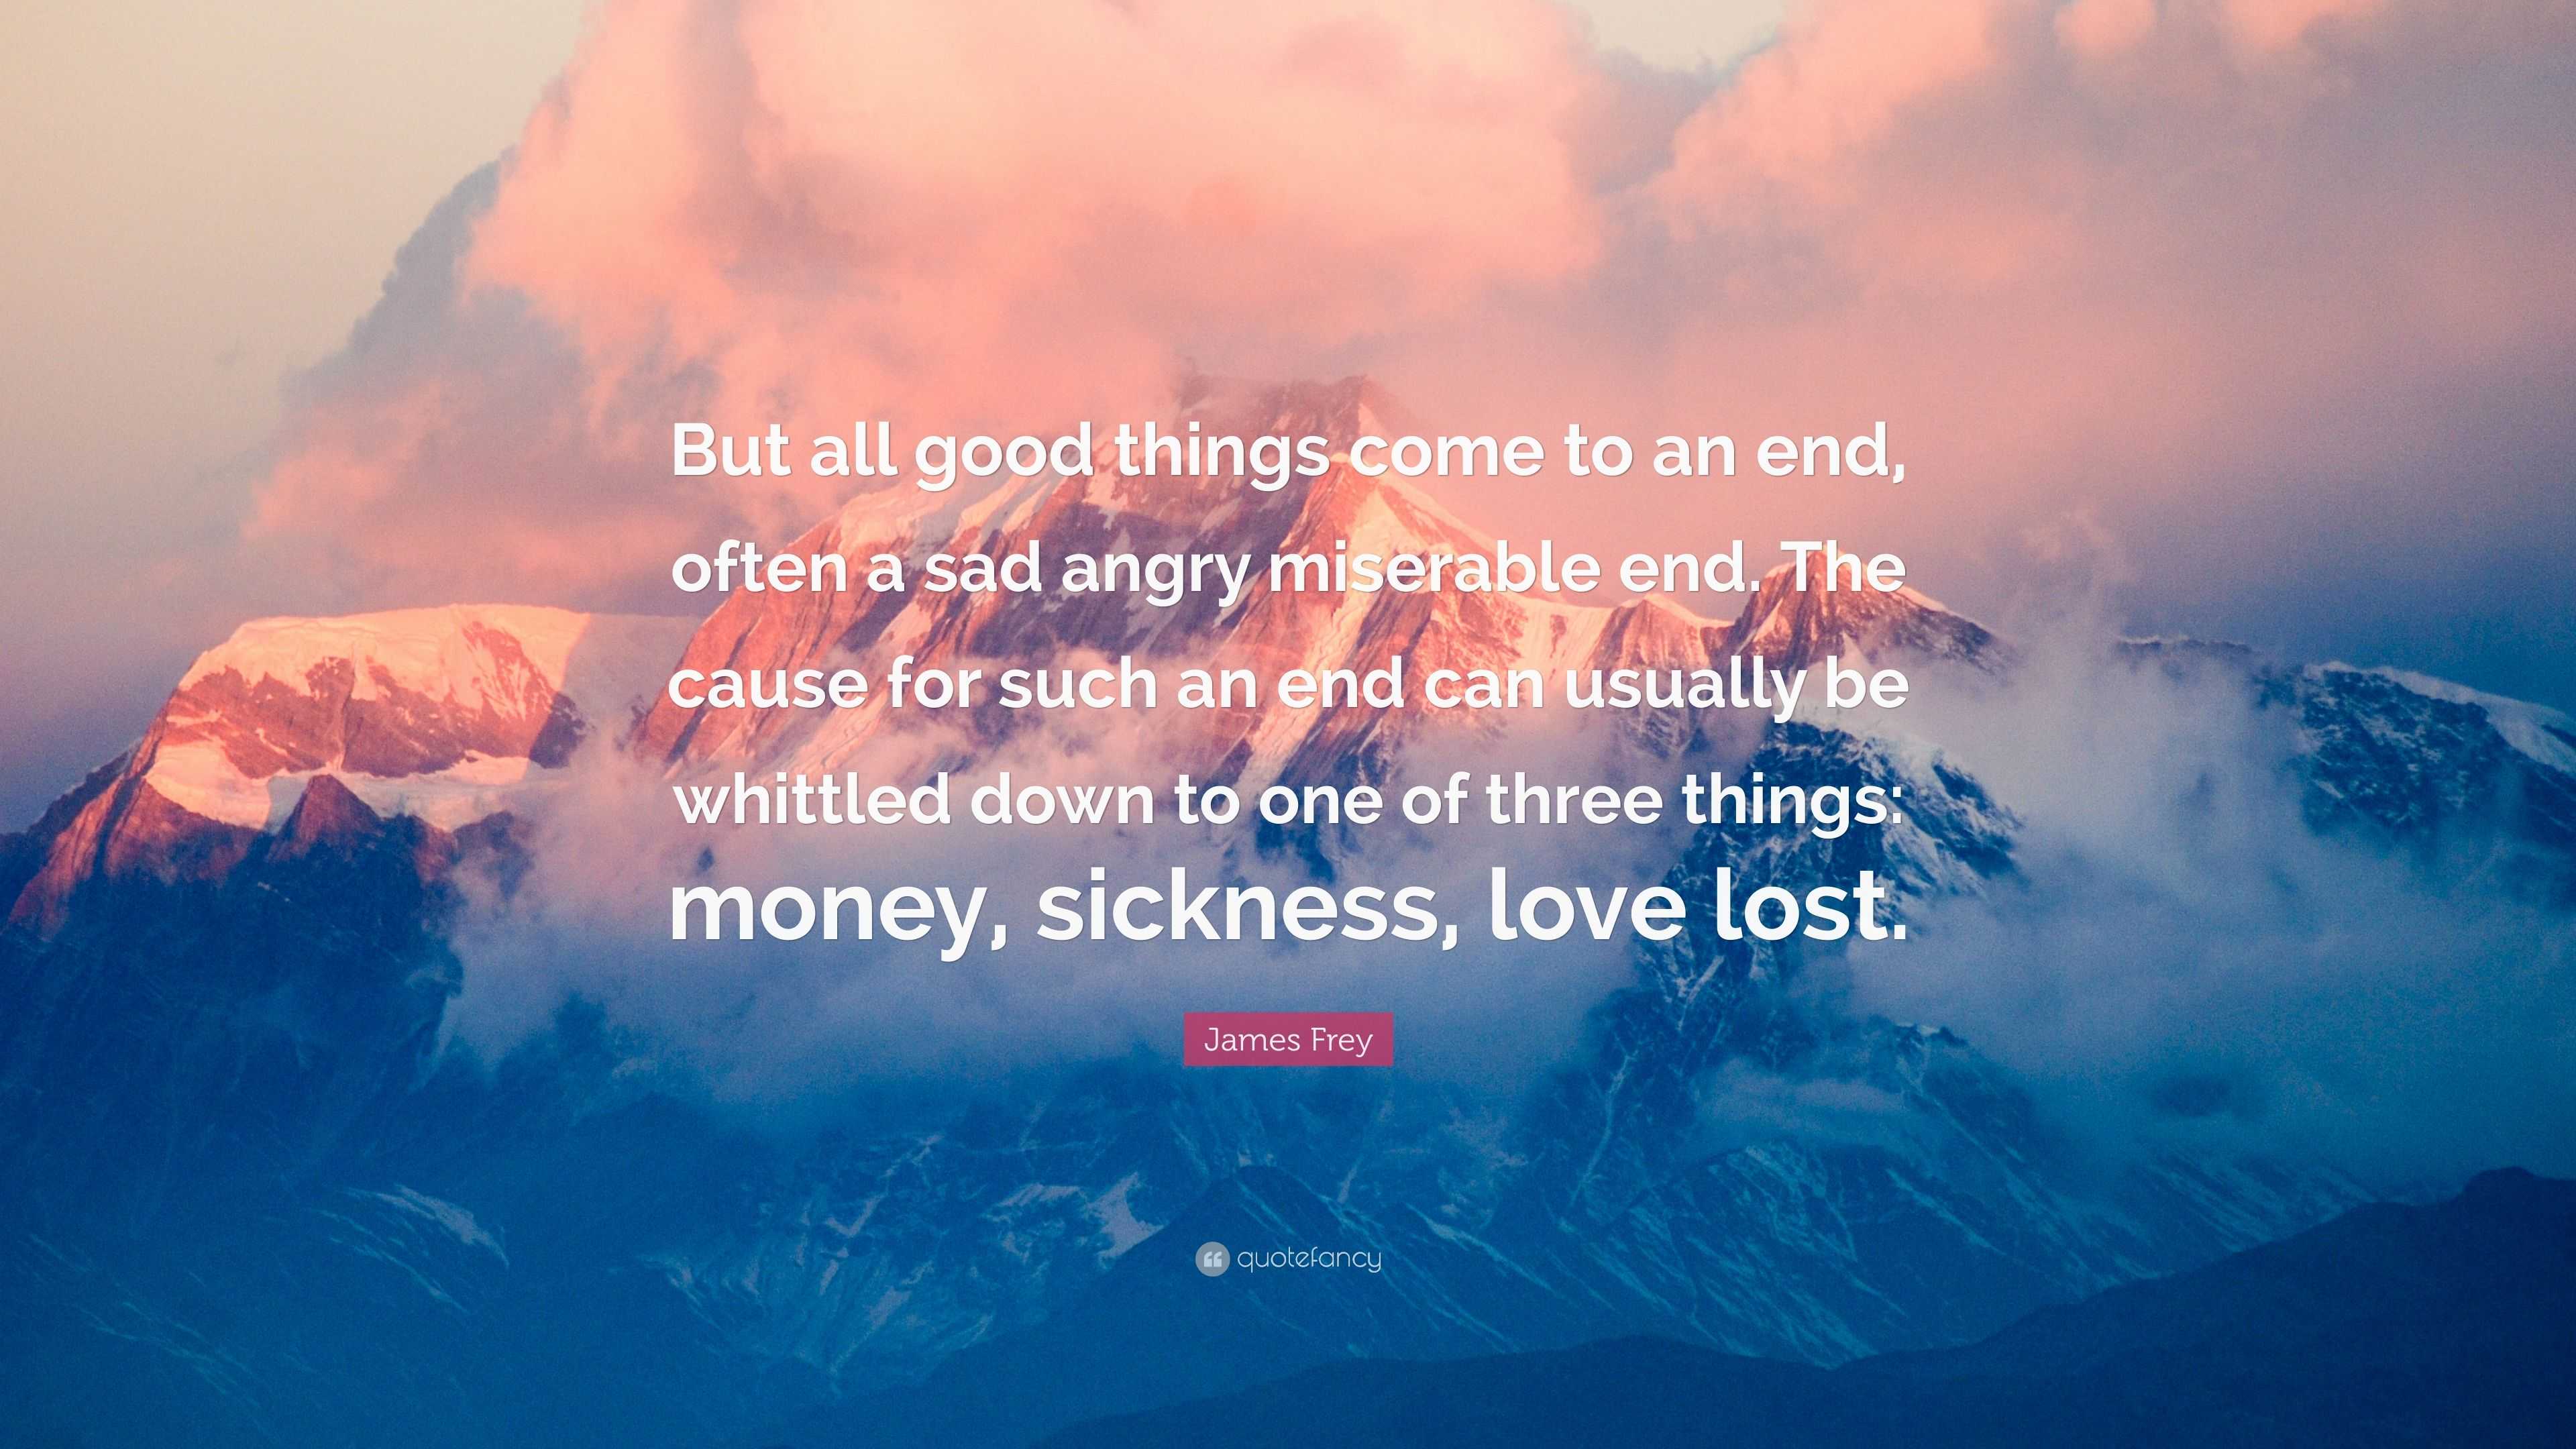 James Frey Quote “But all good things e to an end often a